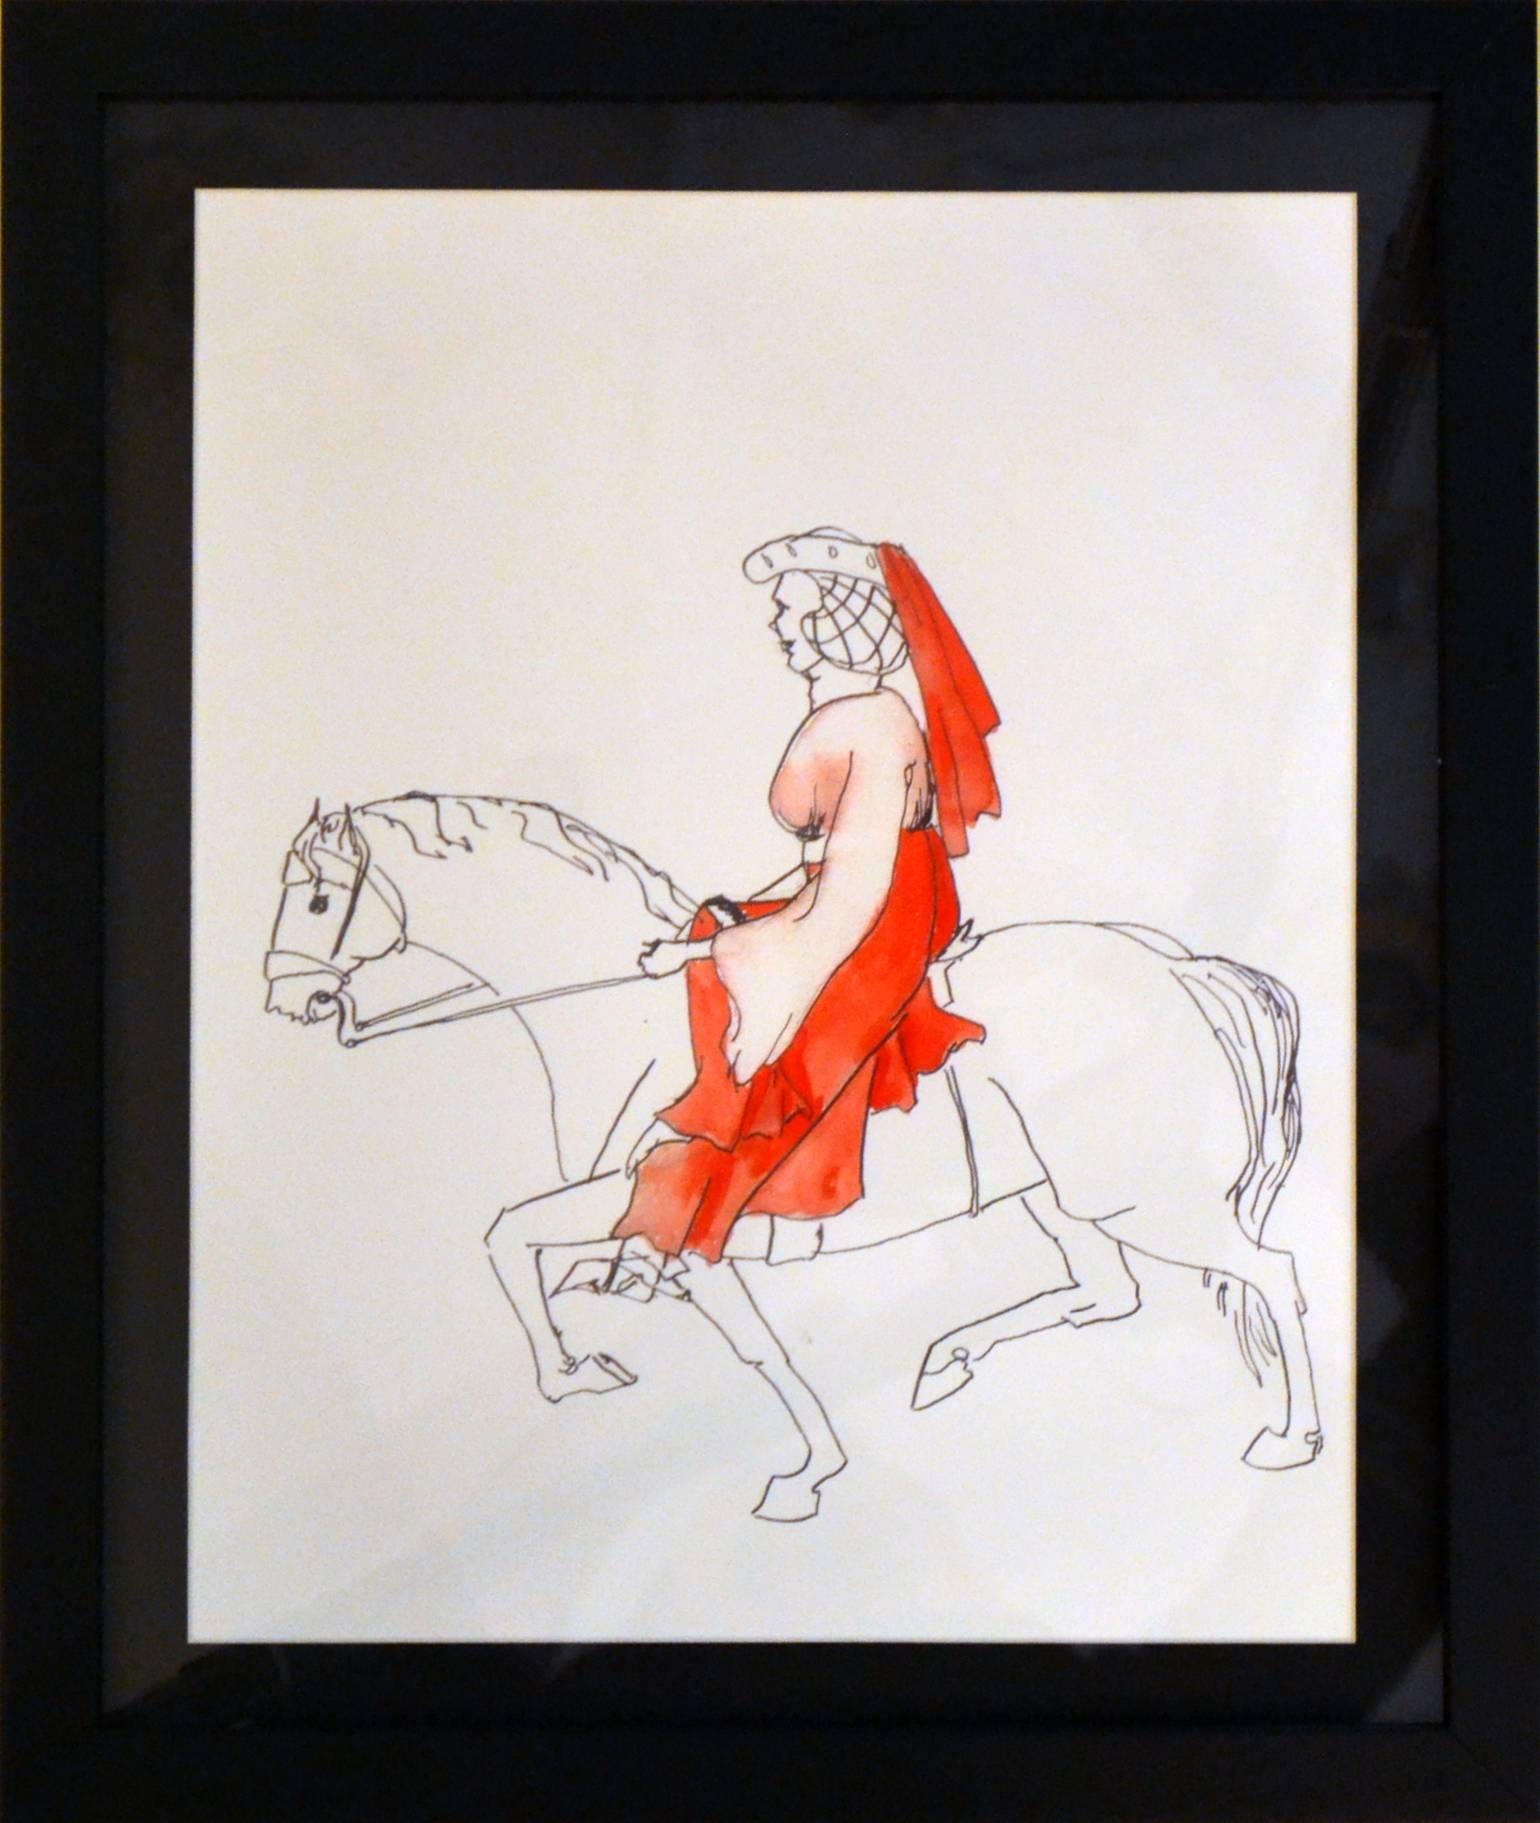 Five pencil drawings with partial watercoloring of characters from the medieval period traveling on horseback. The drawings have strong resemblance to the pilgrims who journey like in Geoffrey Chaucer's 'Canterbury Tales', 1387-1400.
They are newly